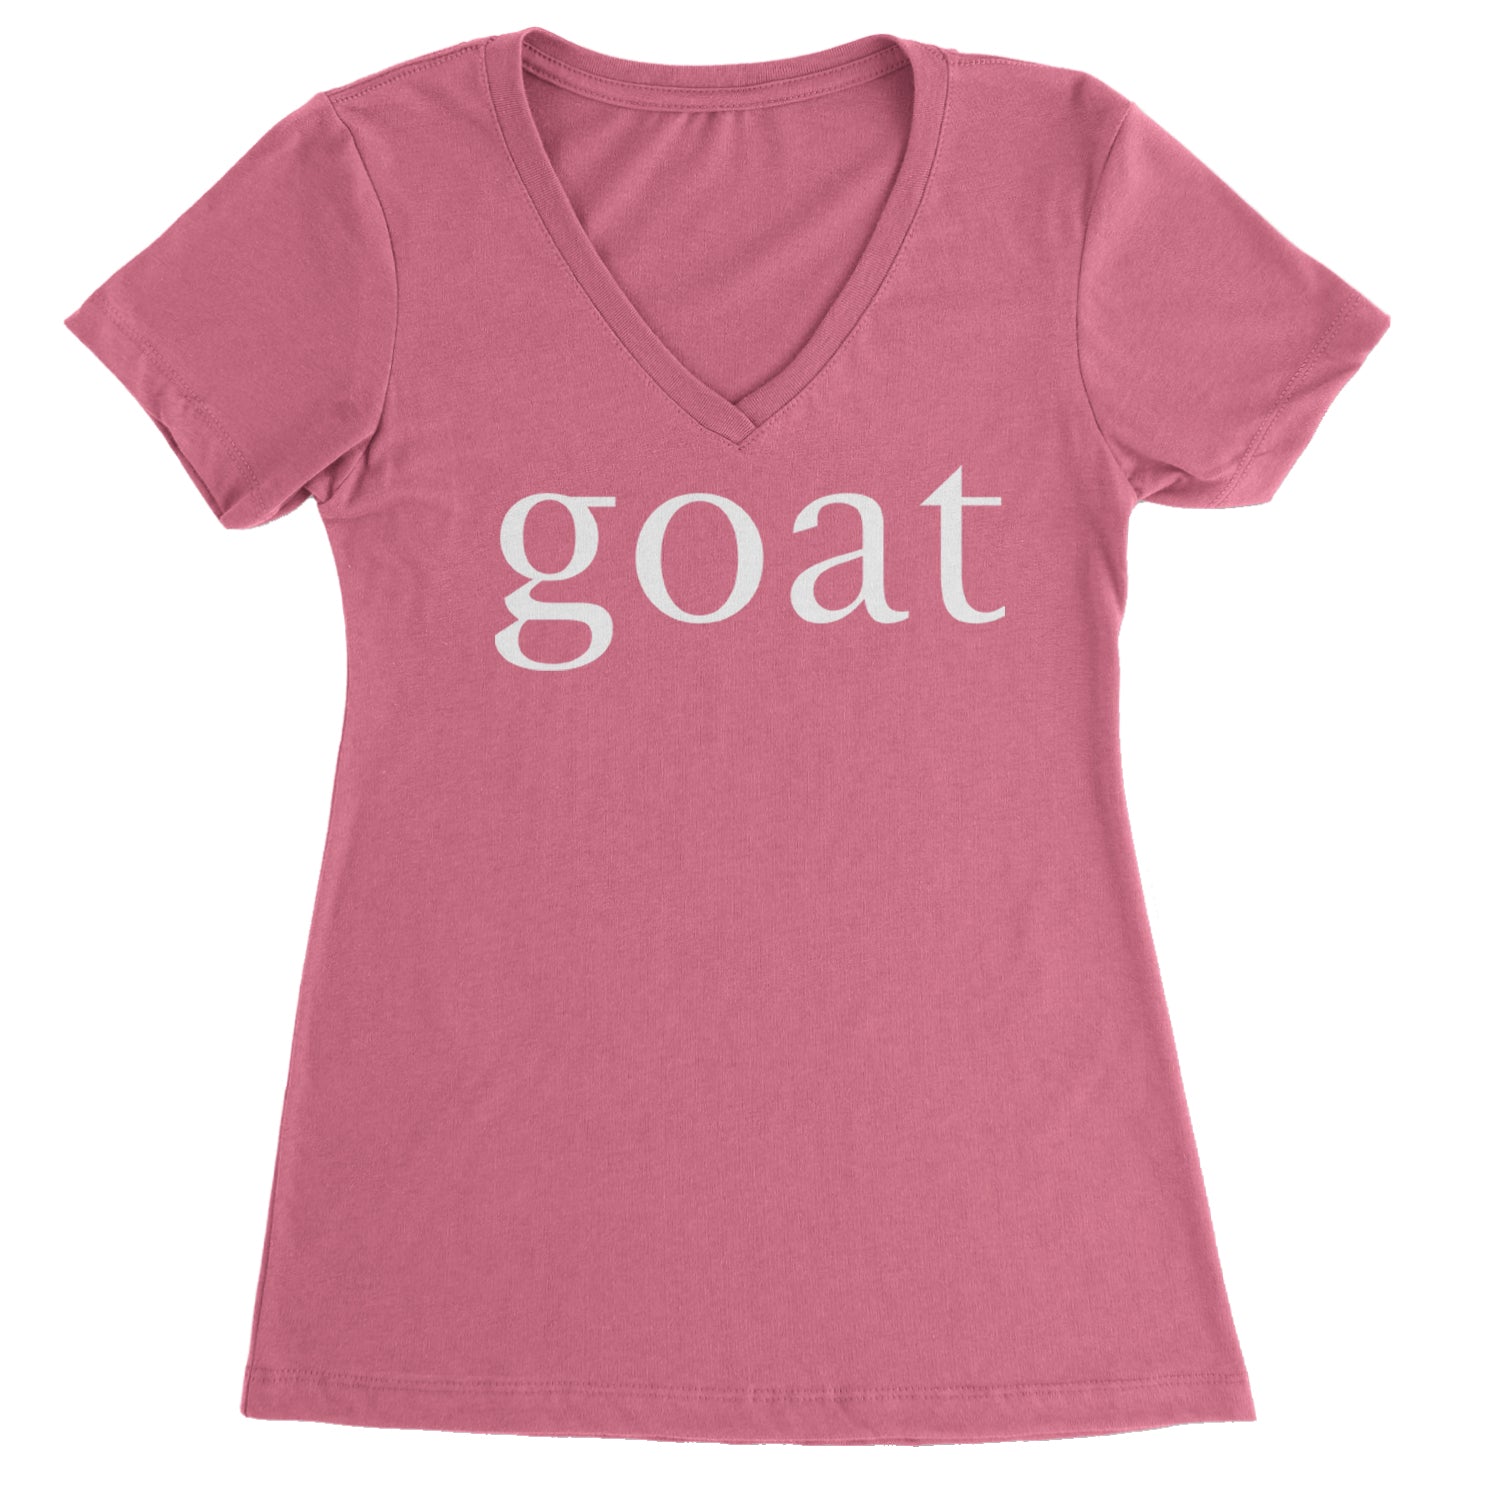 GOAT - Greatest Of All Time  Ladies V-Neck T-shirt Hot Pink